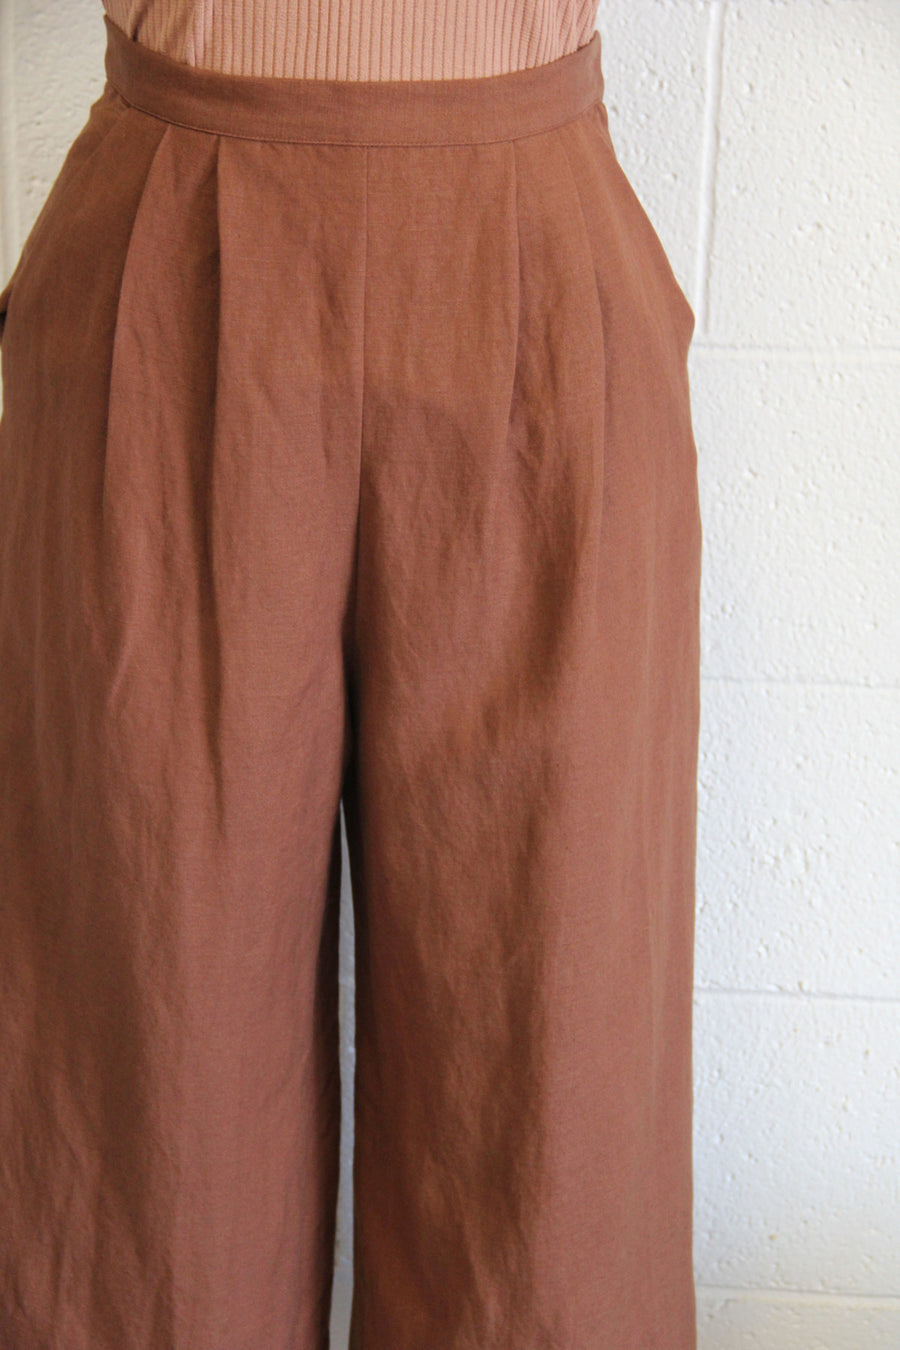 PRE-LOVED - FIRST RITE - CROPPED CULOTTE - CLAY